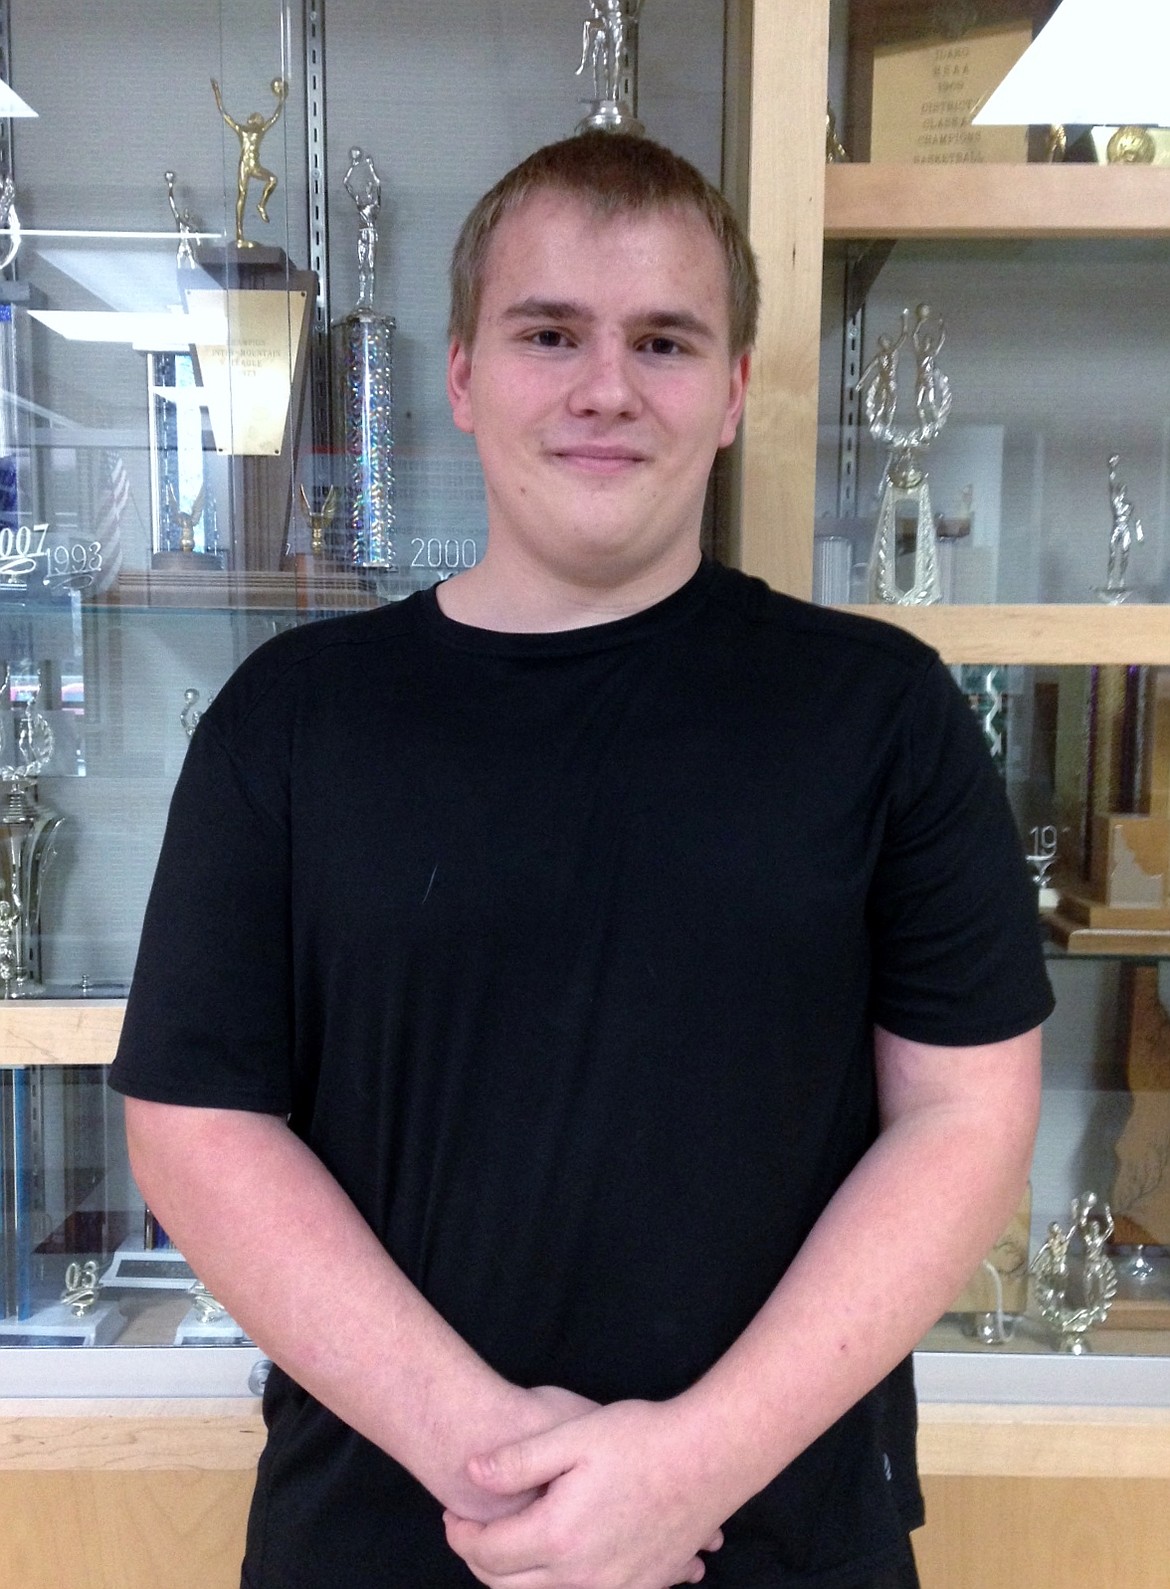 Kalyb Smith, a freshman at Wallace Junior/Senior High and son of Crystal Smith, is the second Elks Teen of the Month for April.  Kalyb is active on the football team and his favorite subjects are math and P.E.  After high school Kalyb would like to enlist in the Marines and train as a diesel mechanic.